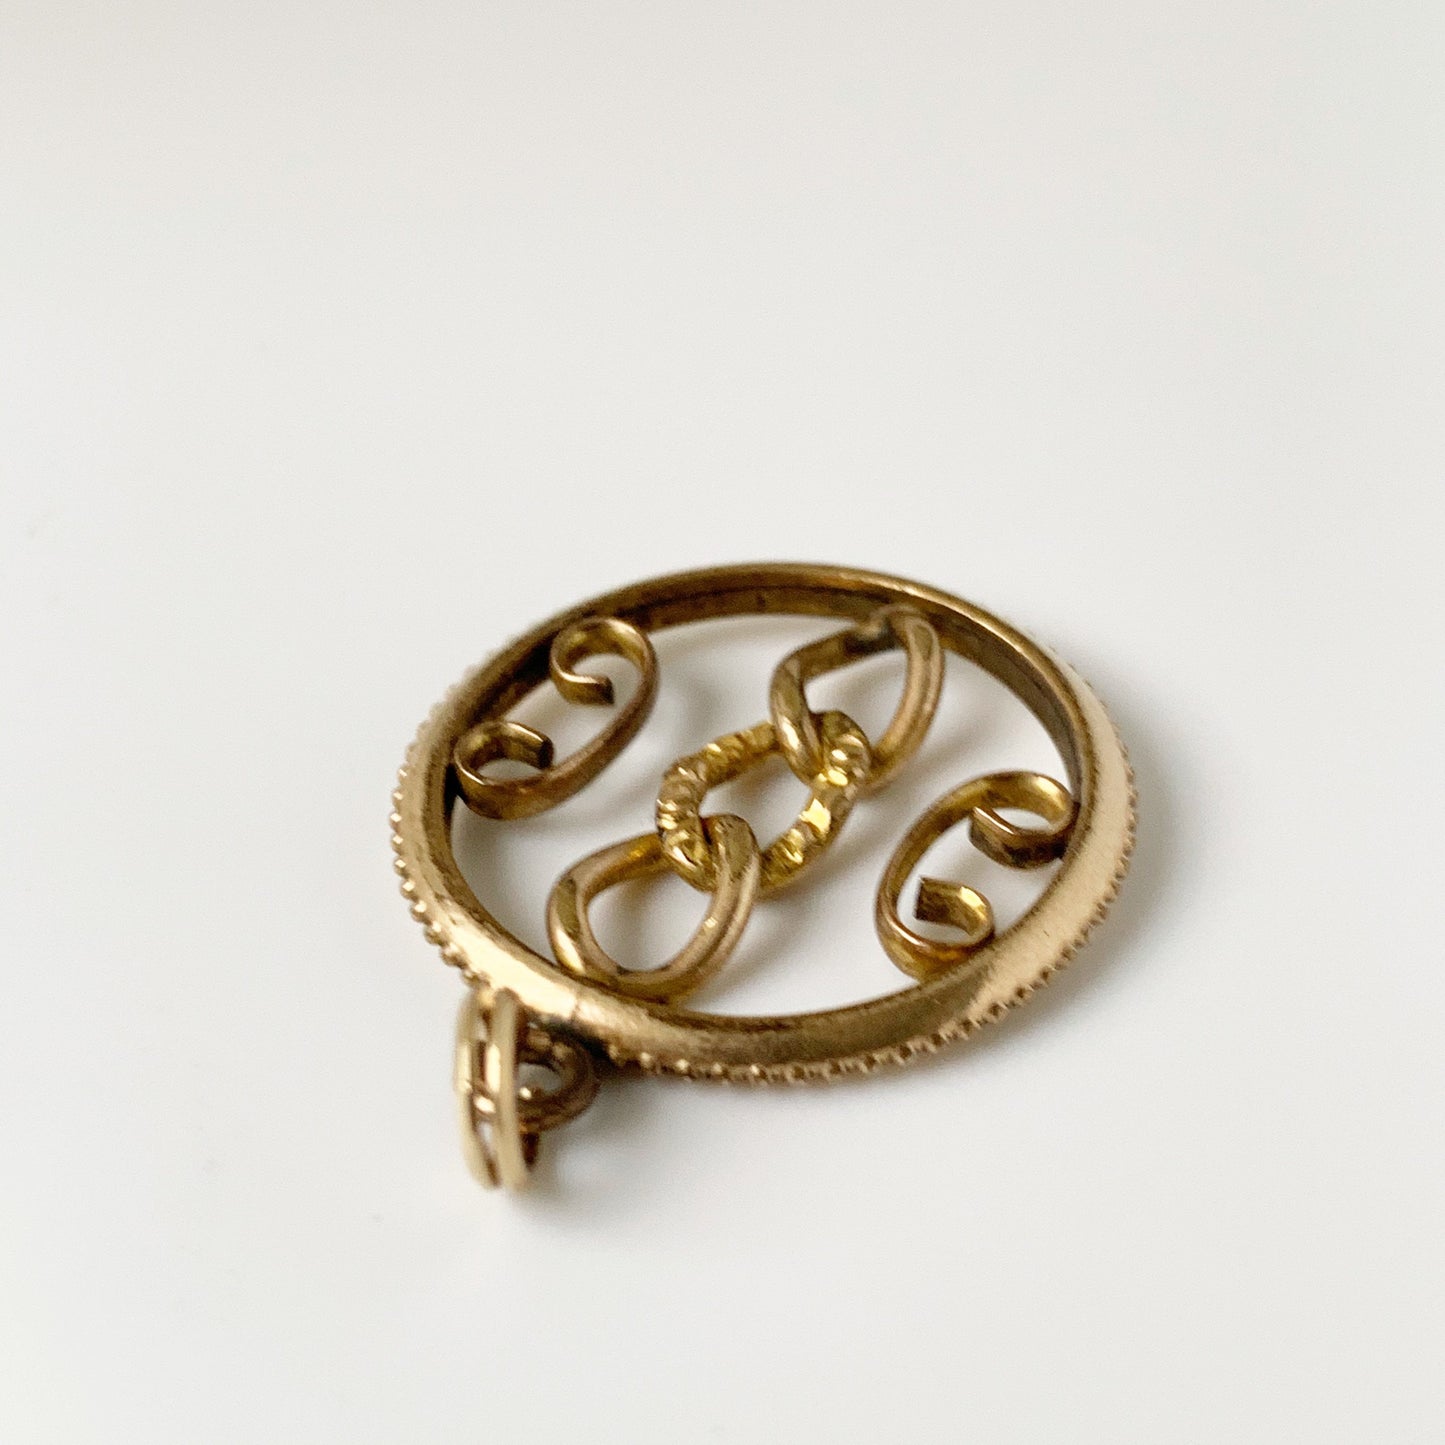 Victorian Scrollwork Watch Fob Pendant | Linked Chain Watch Fob Medallion